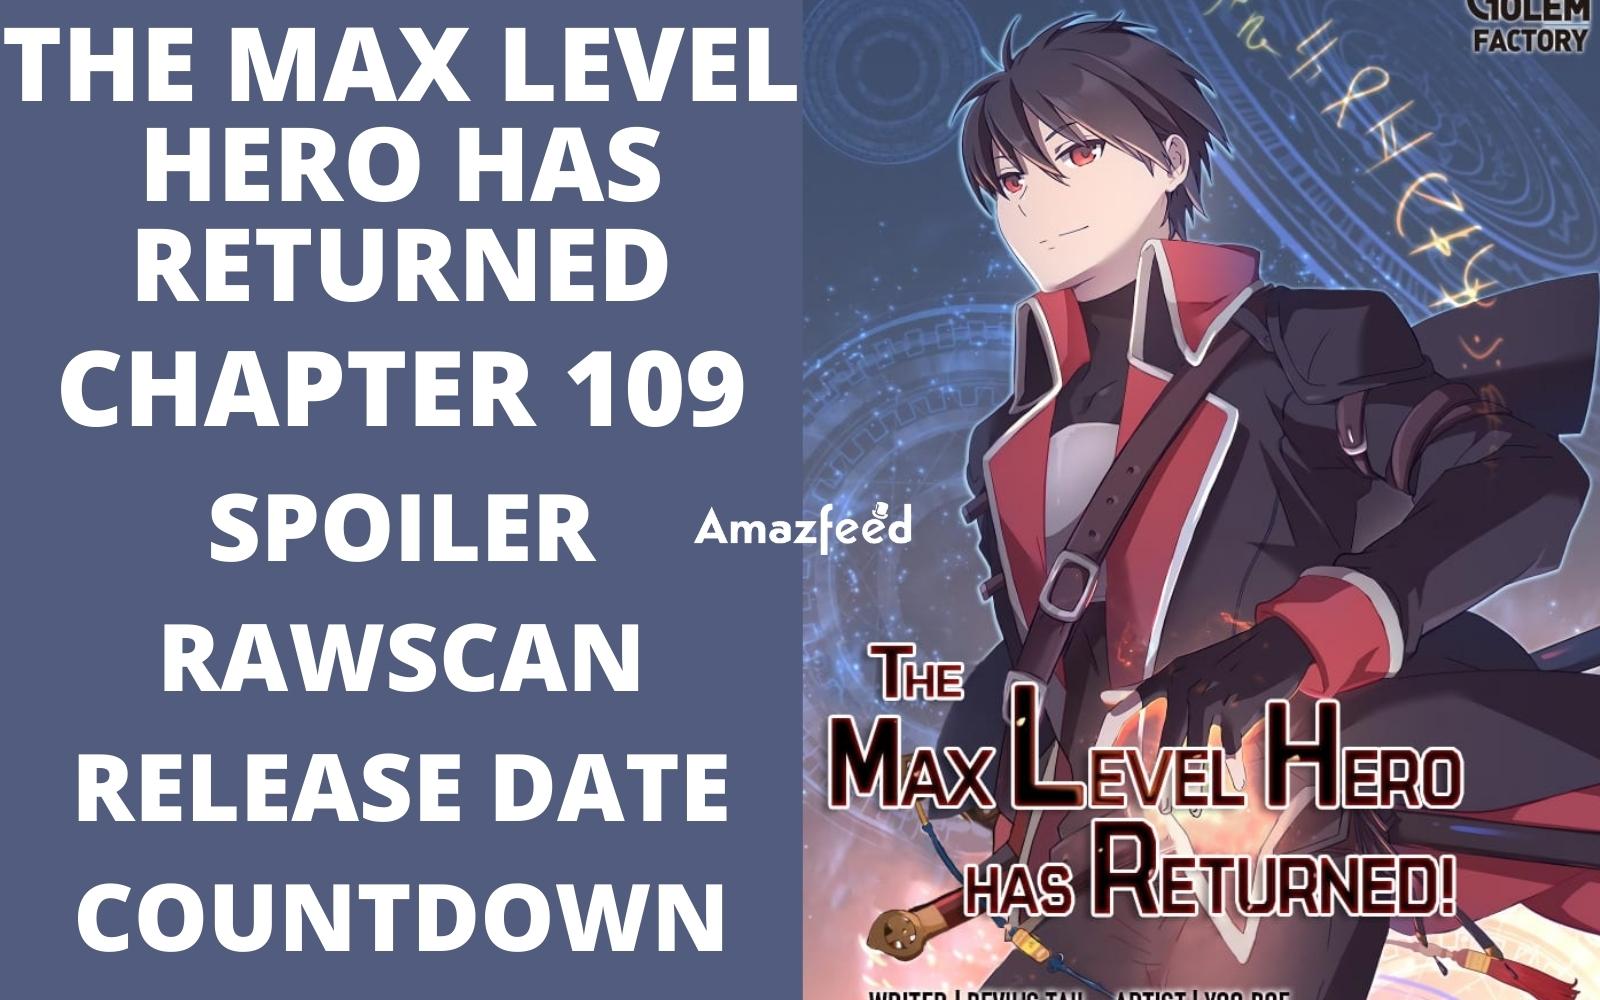 The Max Level Hero Has Returned Chapter 109 Spoiler, Release Date, Raw Scan, Countdown, Color Page